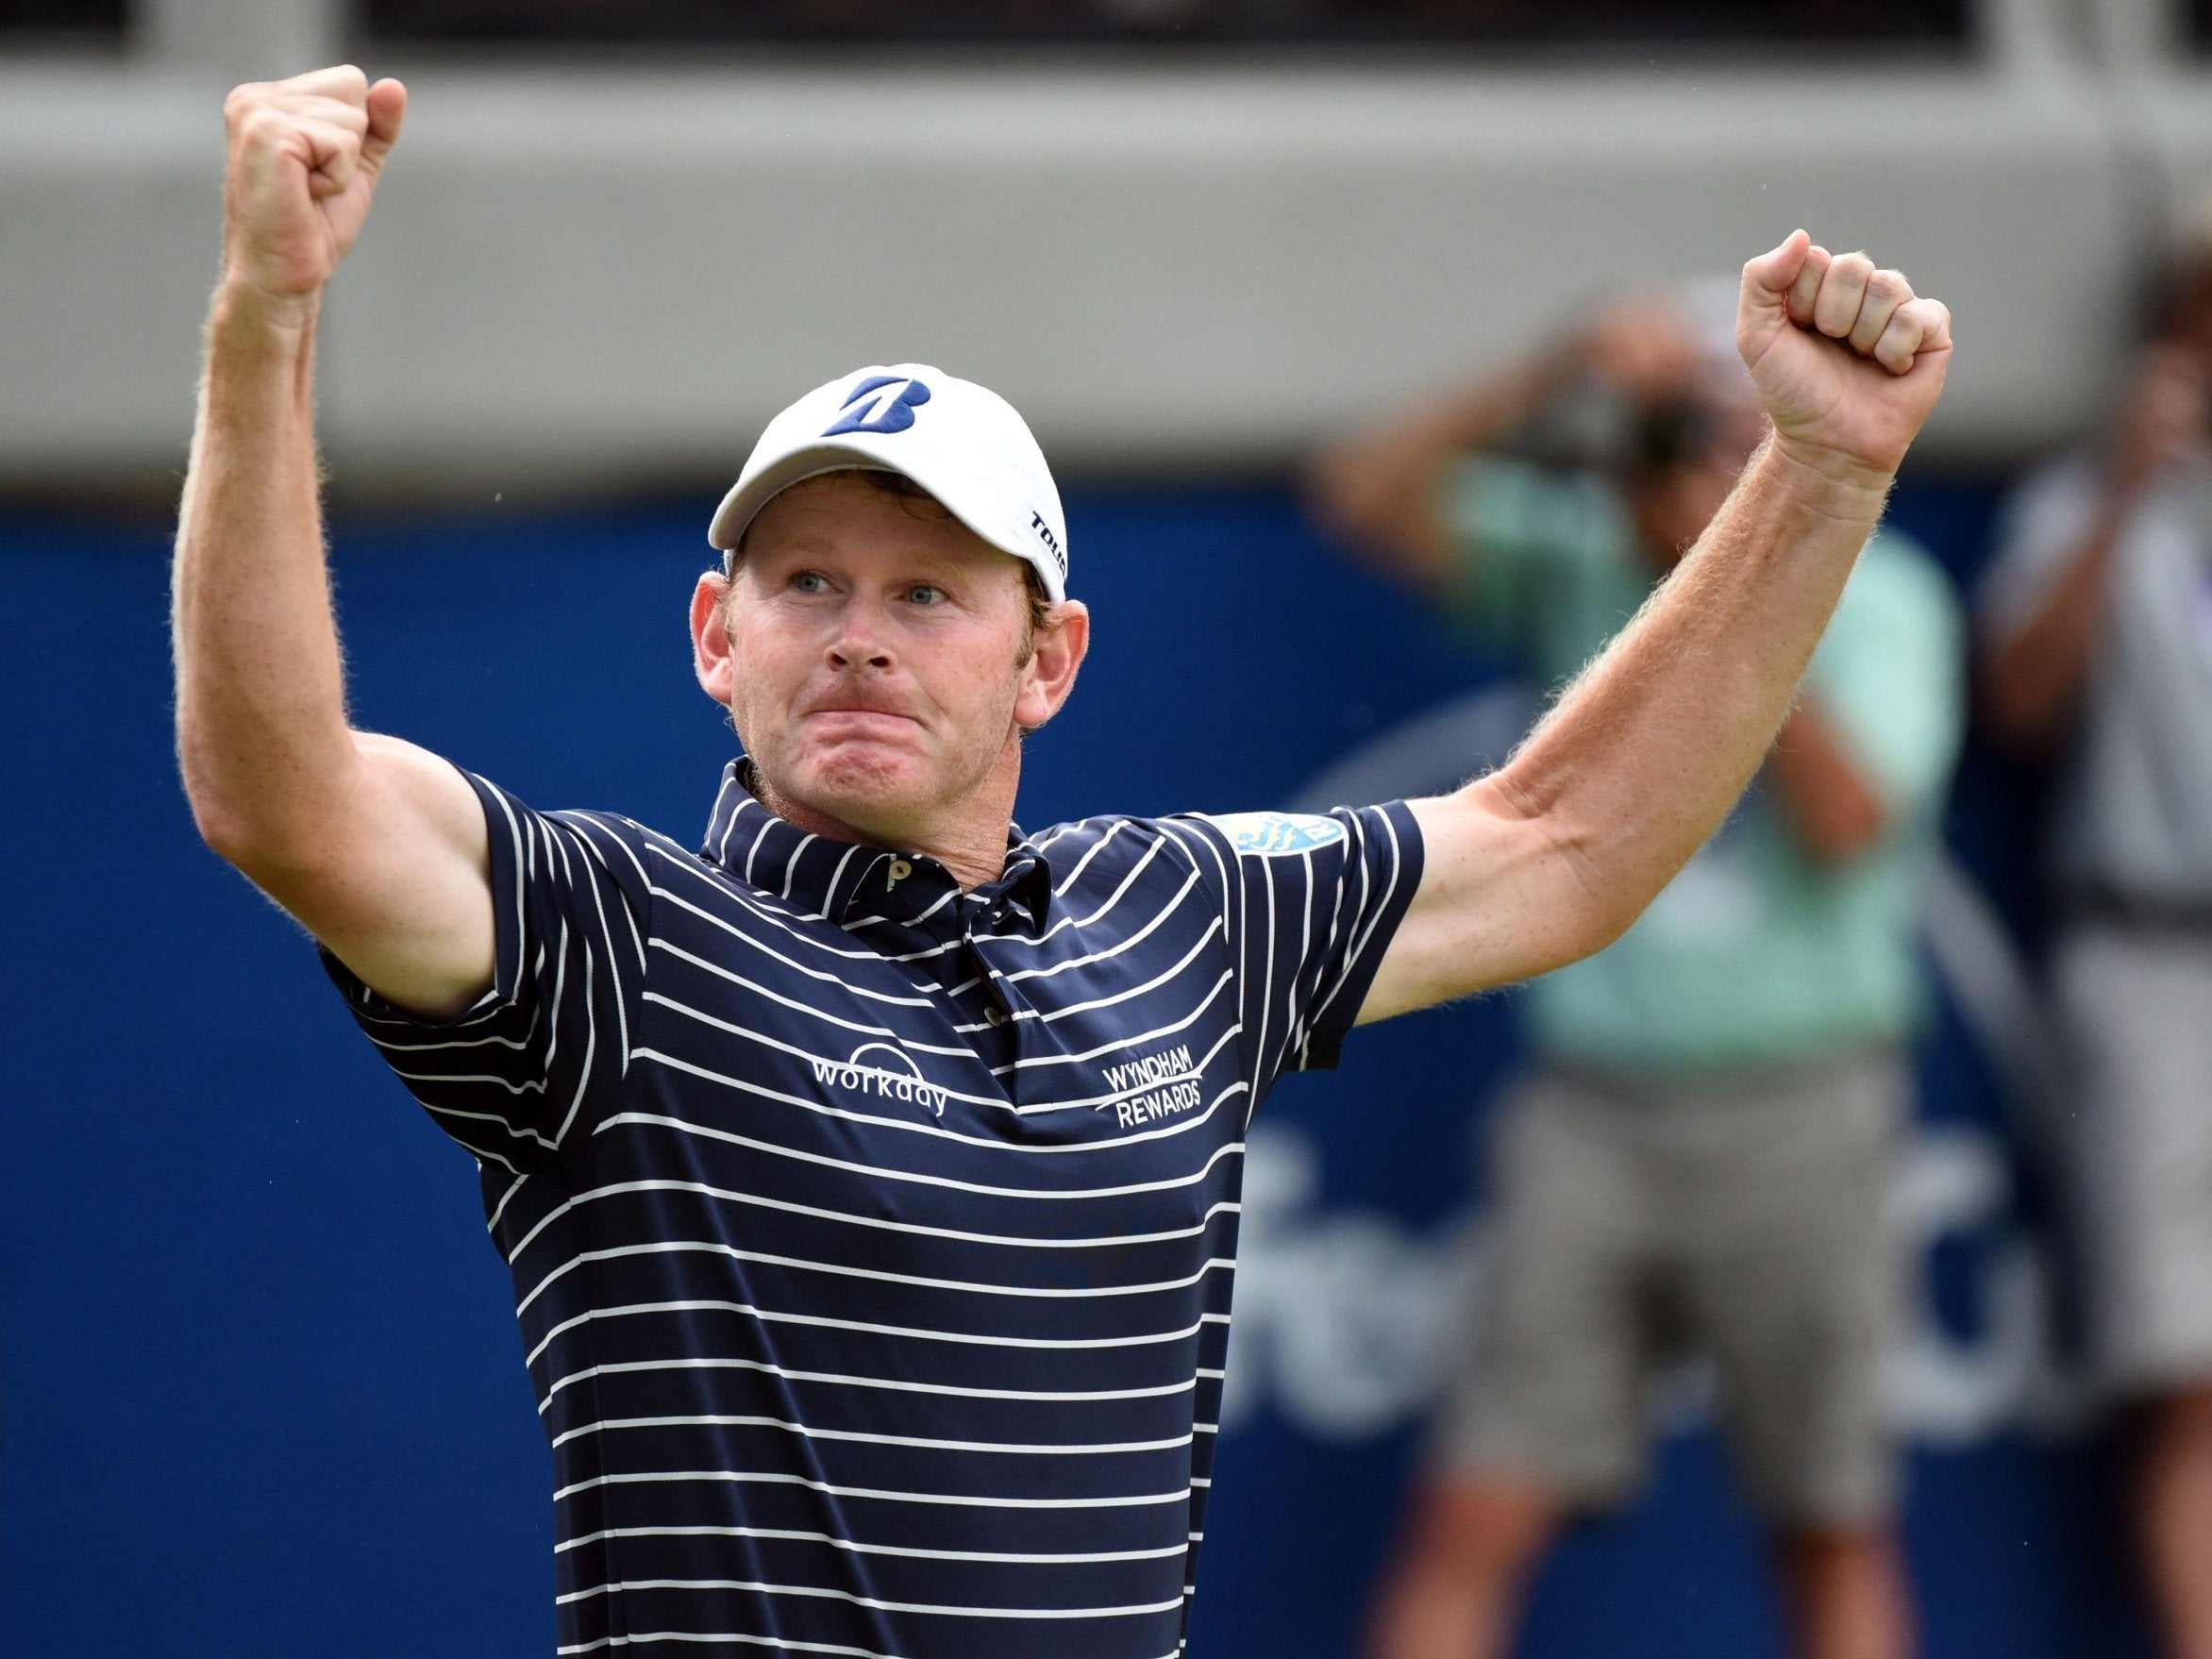 Snedeker won from wire to wire